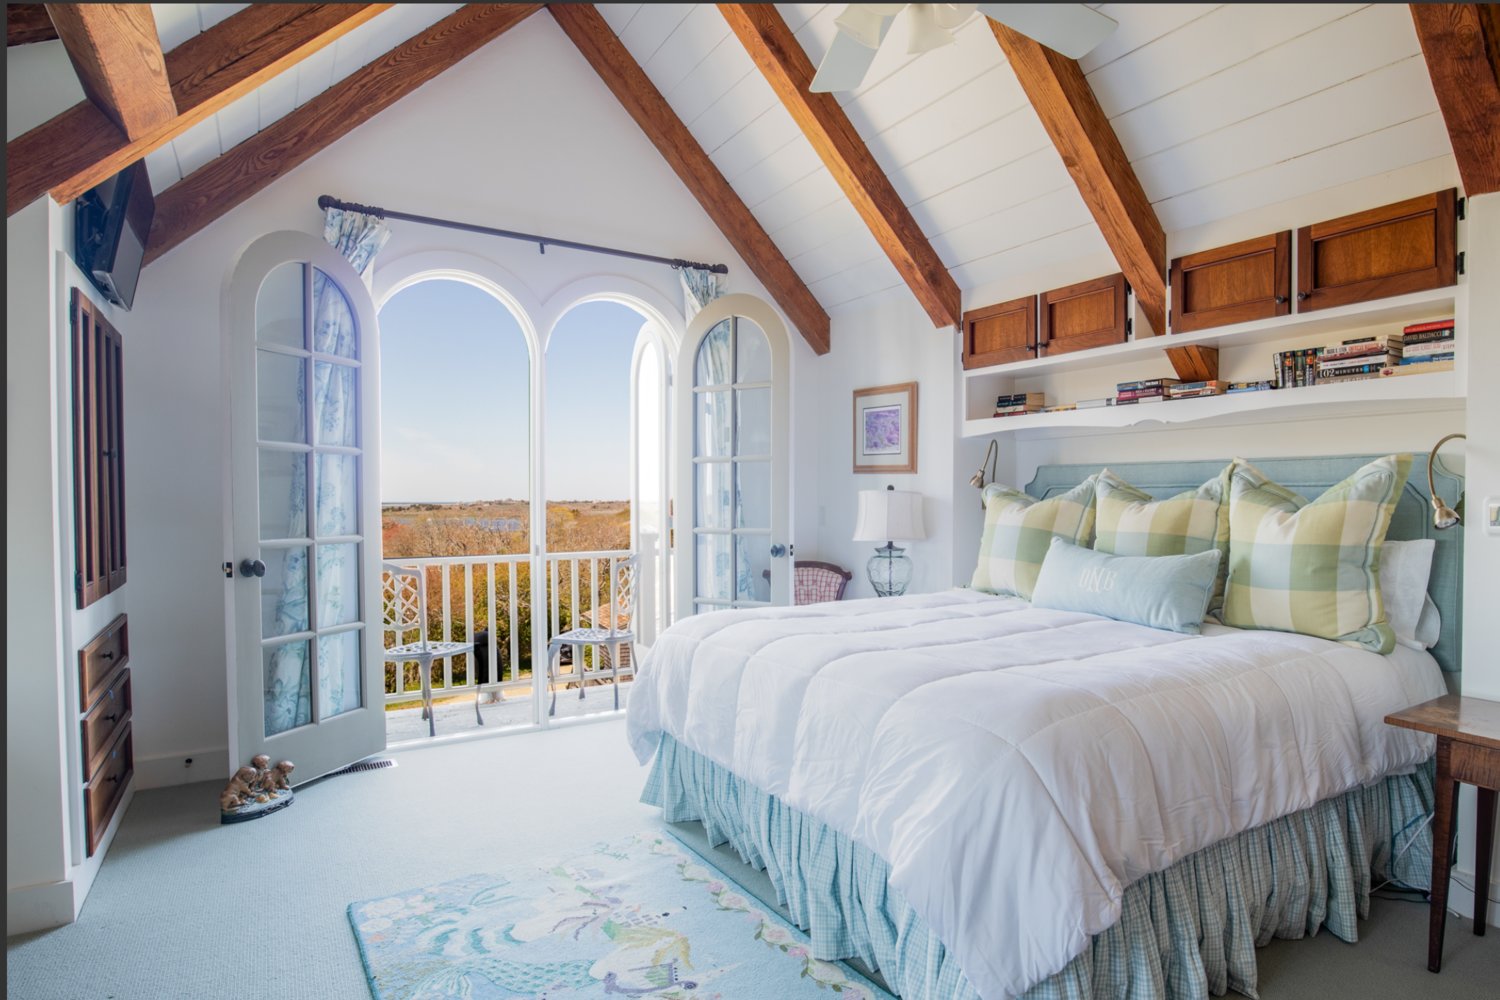 The second-floor master bedroom has a vaulted ceiling and a terrace.